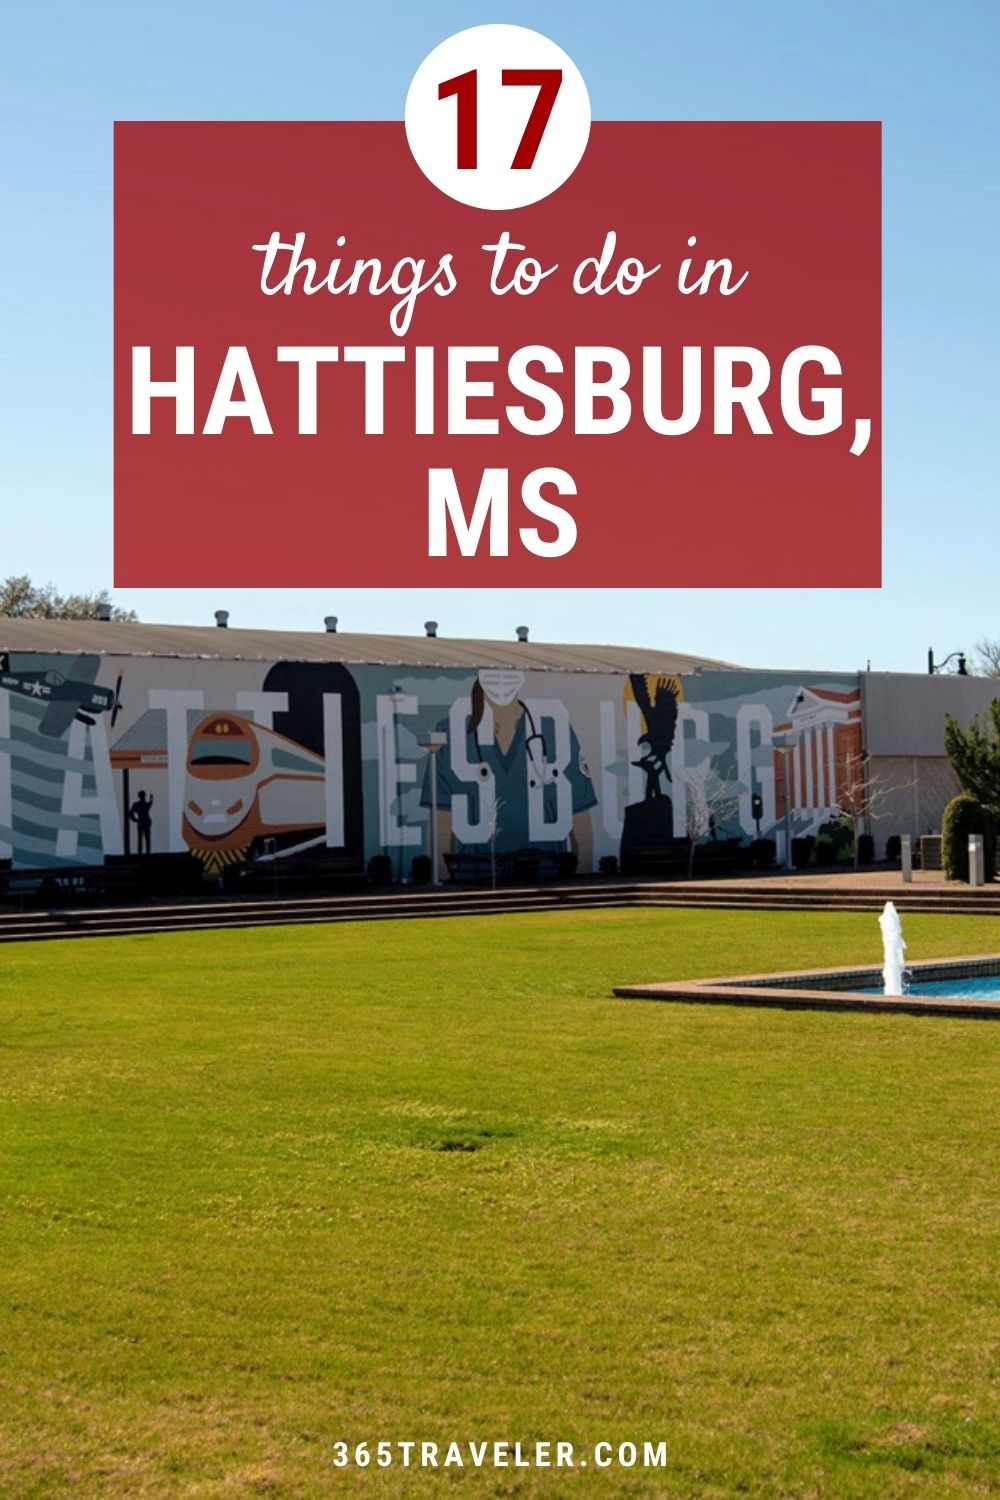 17 THINGS TO DO IN HATTIESBURG MS YOU'LL LOVE